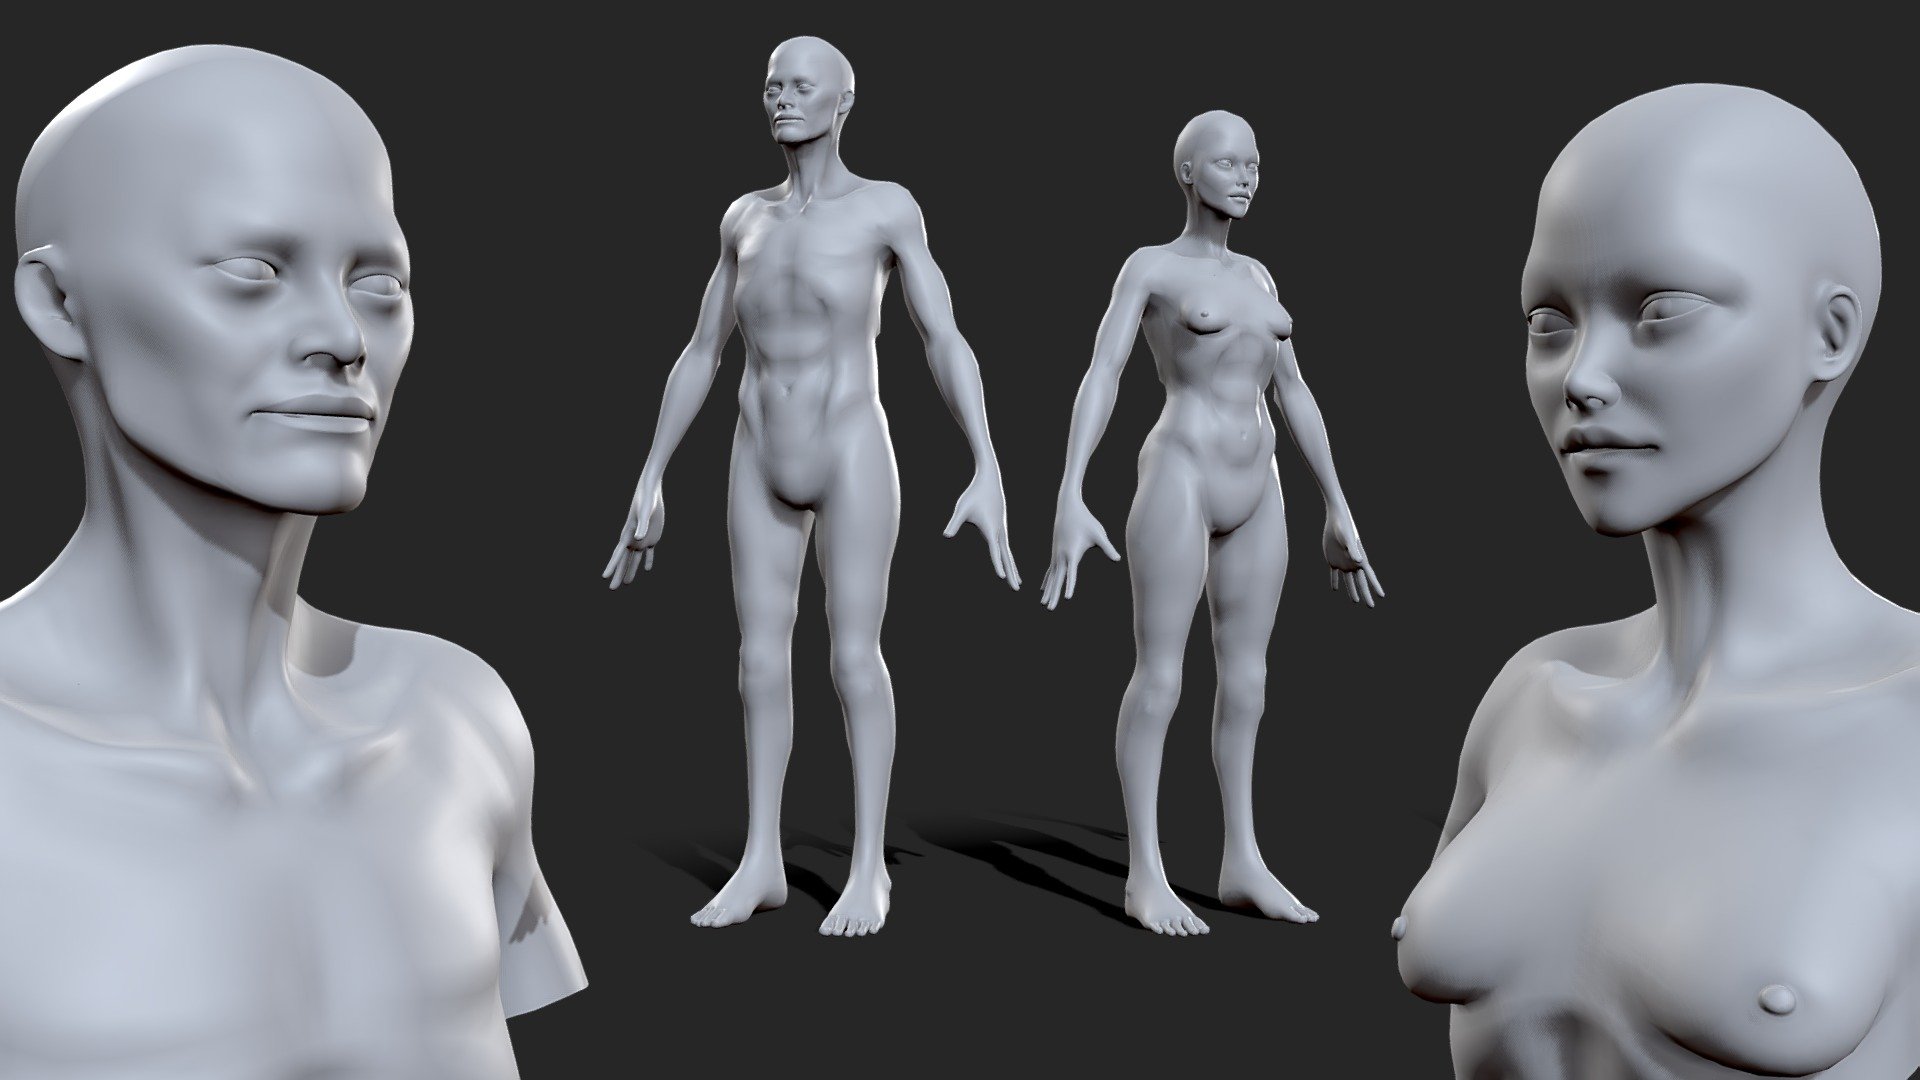 Click the link to get the model:


https://www.artstation.com/a/32280850
Thin Male &amp; Female was made  in maya with proper mesh flow and UVs unwrapped.

File format:





obj




fbx




maya file




Blender file



Inside the product:





clean topology




Single Udim




unwrapped Uvs for texturing




no overlapping UVs




proper naming and grouping




no unwanted shaders and history.



For Individual model click the link below:


https://skfb.ly/oMIMC ( ThinMale)



https://skfb.ly/oMJo8 ( Thin Female)
You May also like:


👉https://skfb.ly/oNM79 👈



👉https://skfb.ly/oOZIr 👈


You May also like:


👉 https://skfb.ly/oMLZT 👈
 - Thin Male & Female BaseMesh - Buy Royalty Free 3D model by Tashi59 (@tsering) 3d model